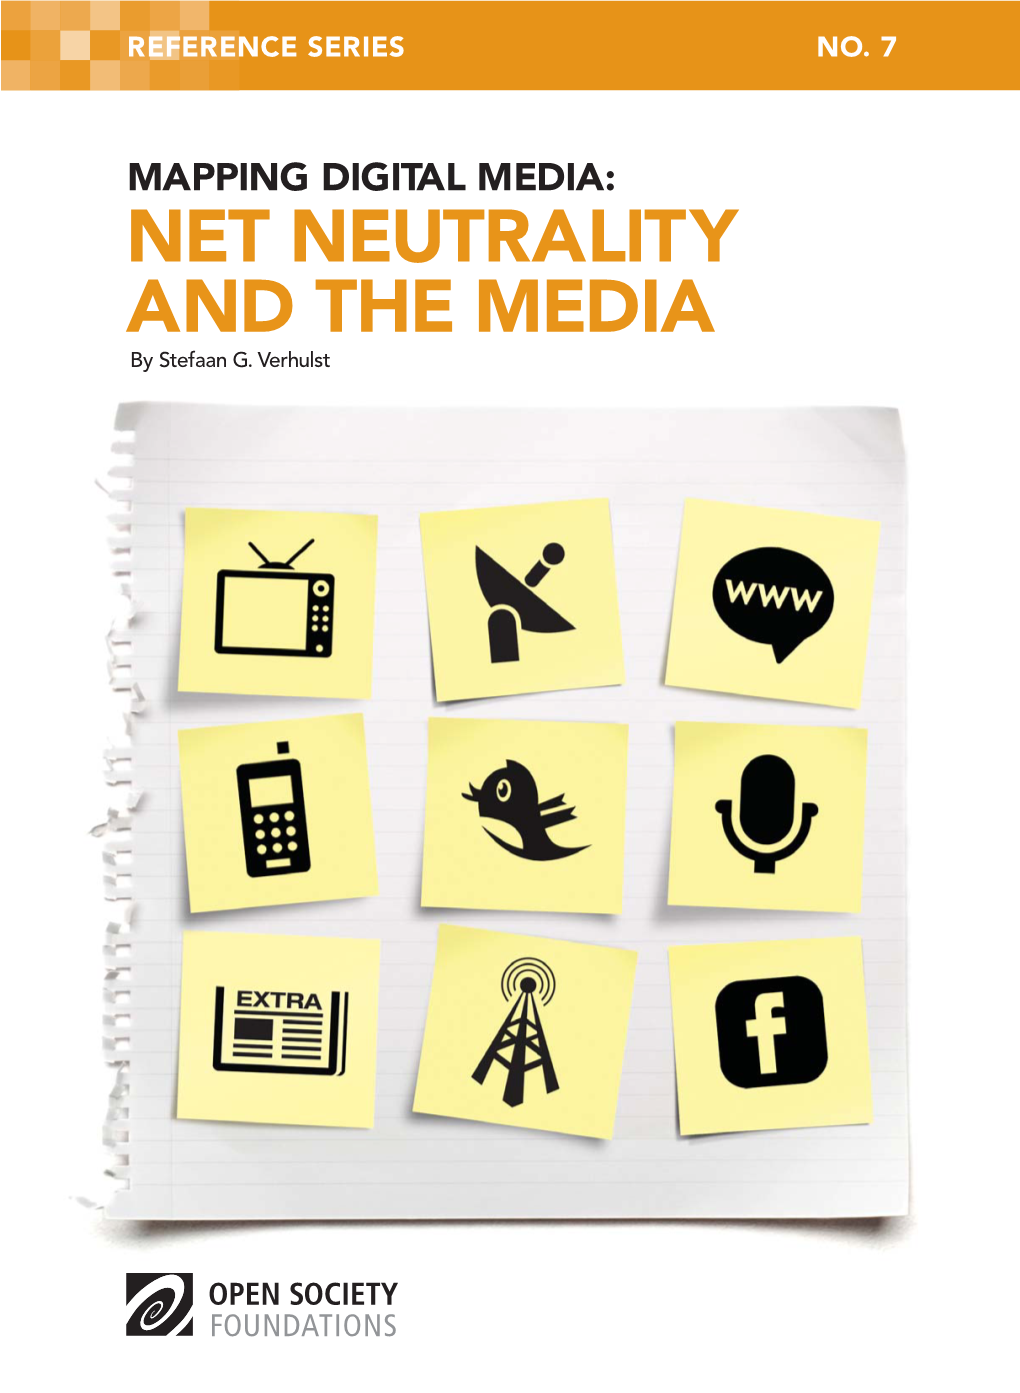 MAPPING DIGITAL MEDIA: NET NEUTRALITY and the MEDIA by Stefaan G